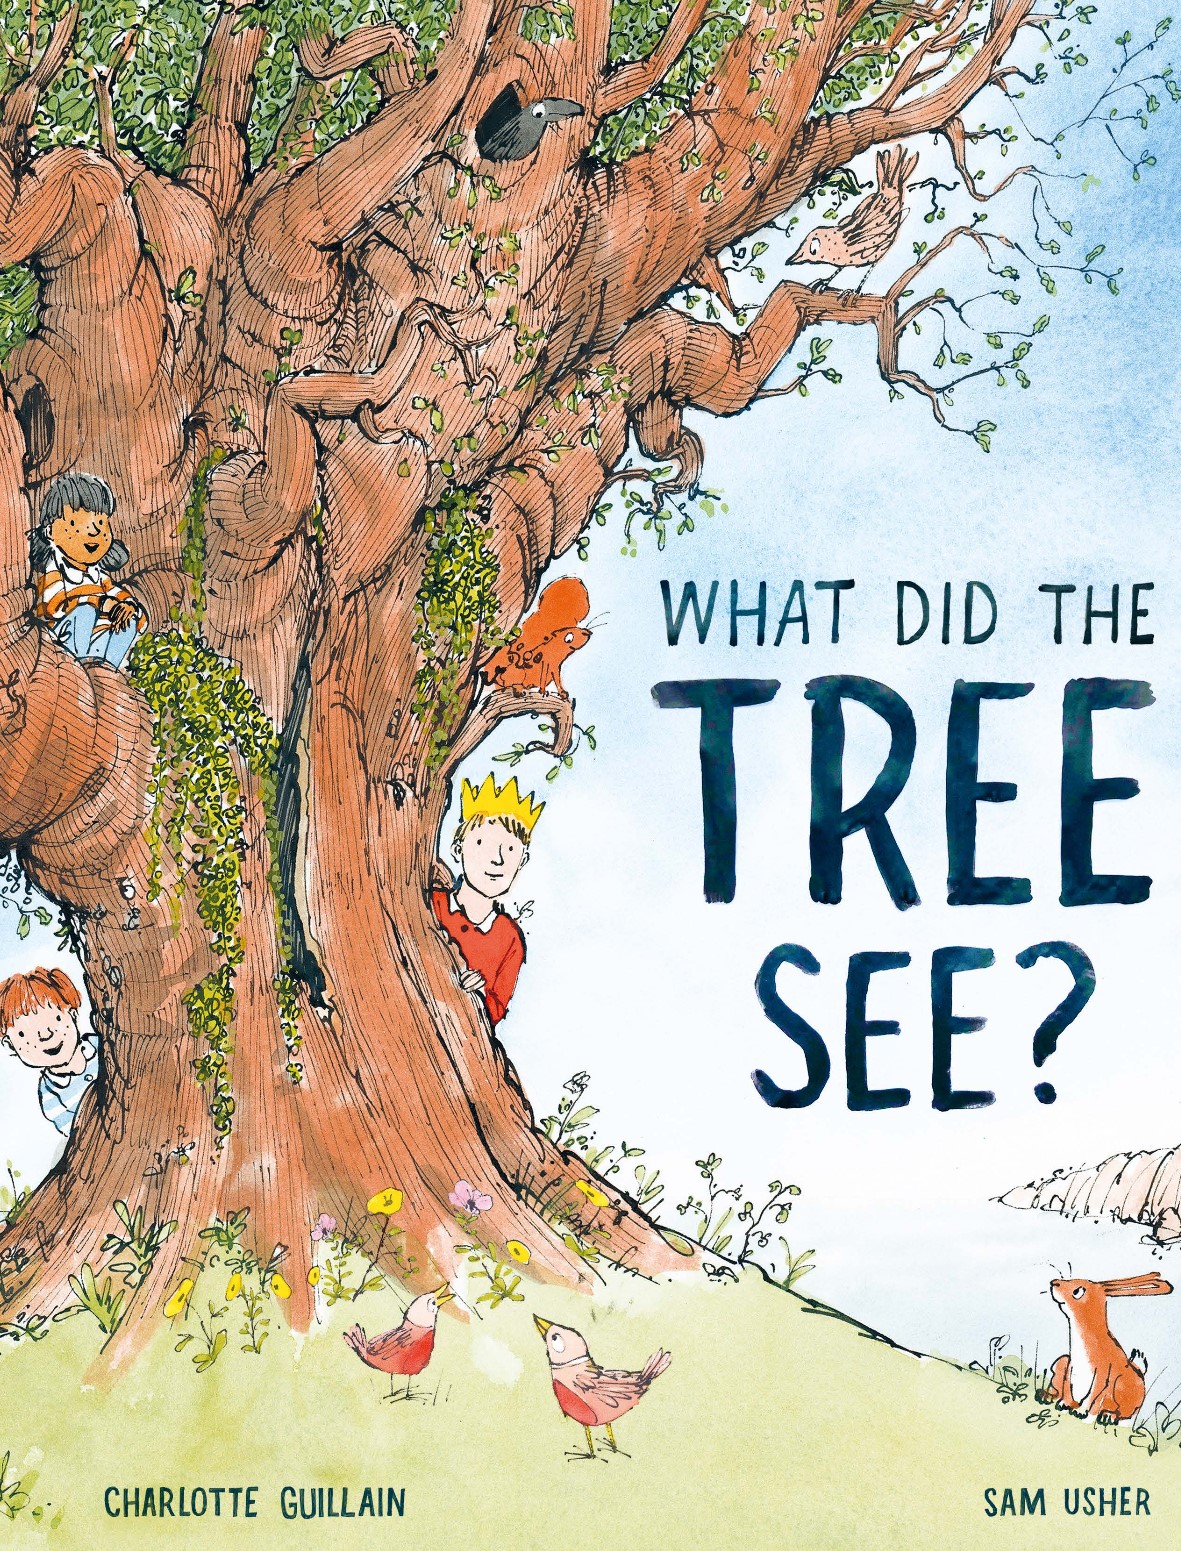 What Did The Tree See? By Charlotte Guillian